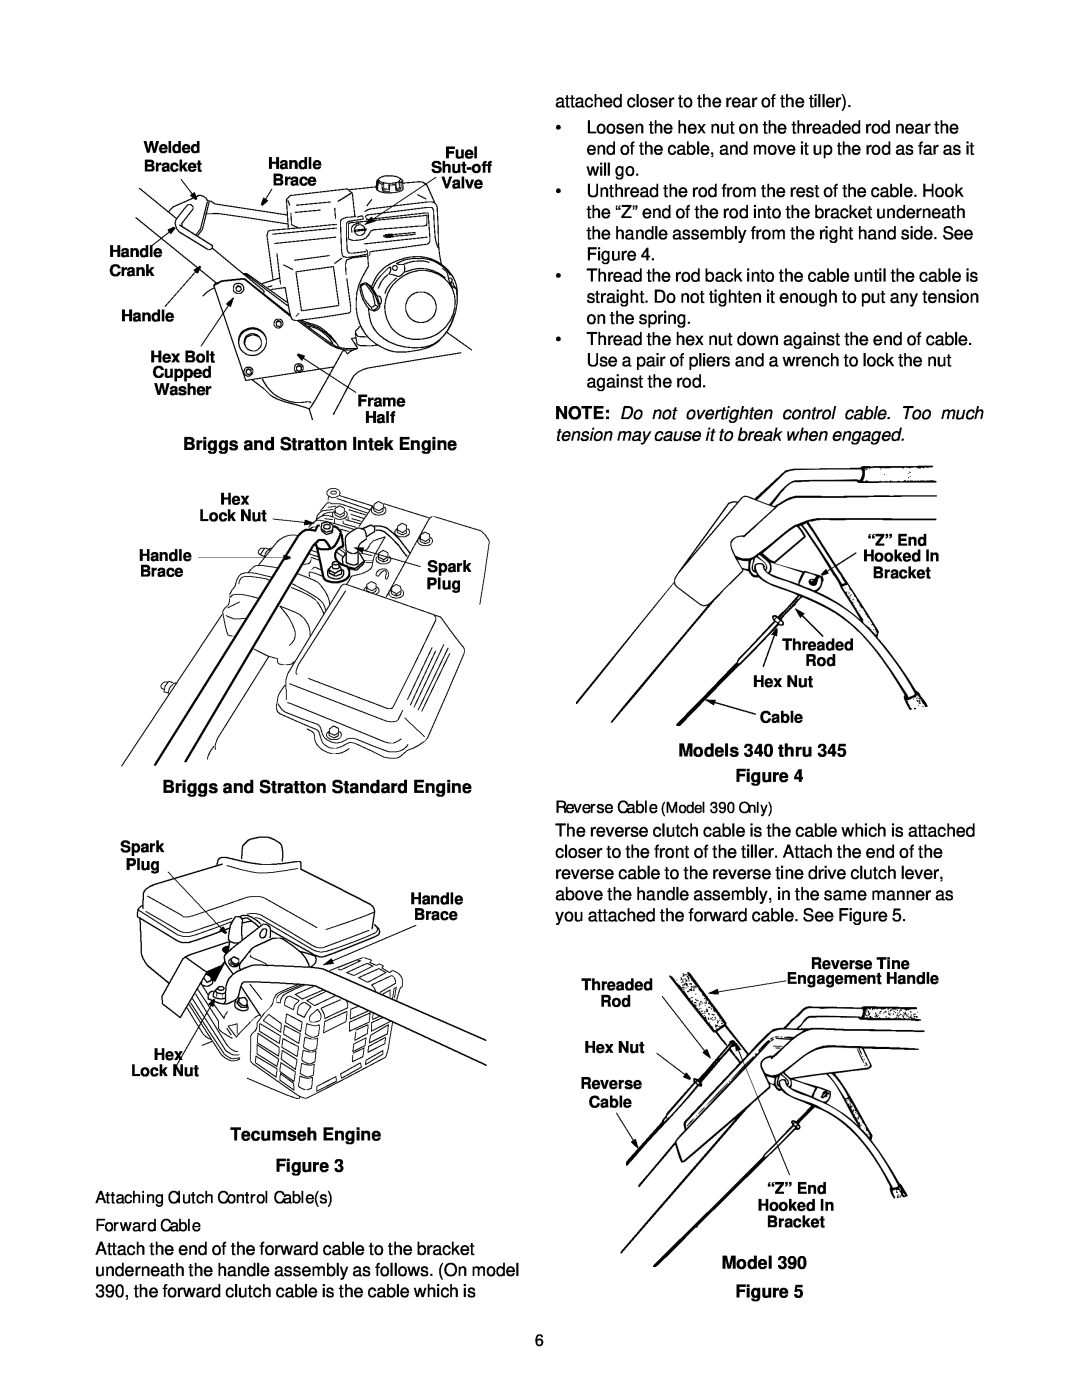 MTD 390 Shown Attaching Clutch Control Cables Forward Cable, Briggs and Stratton Intek Engine, Tecumseh Engine Figure 